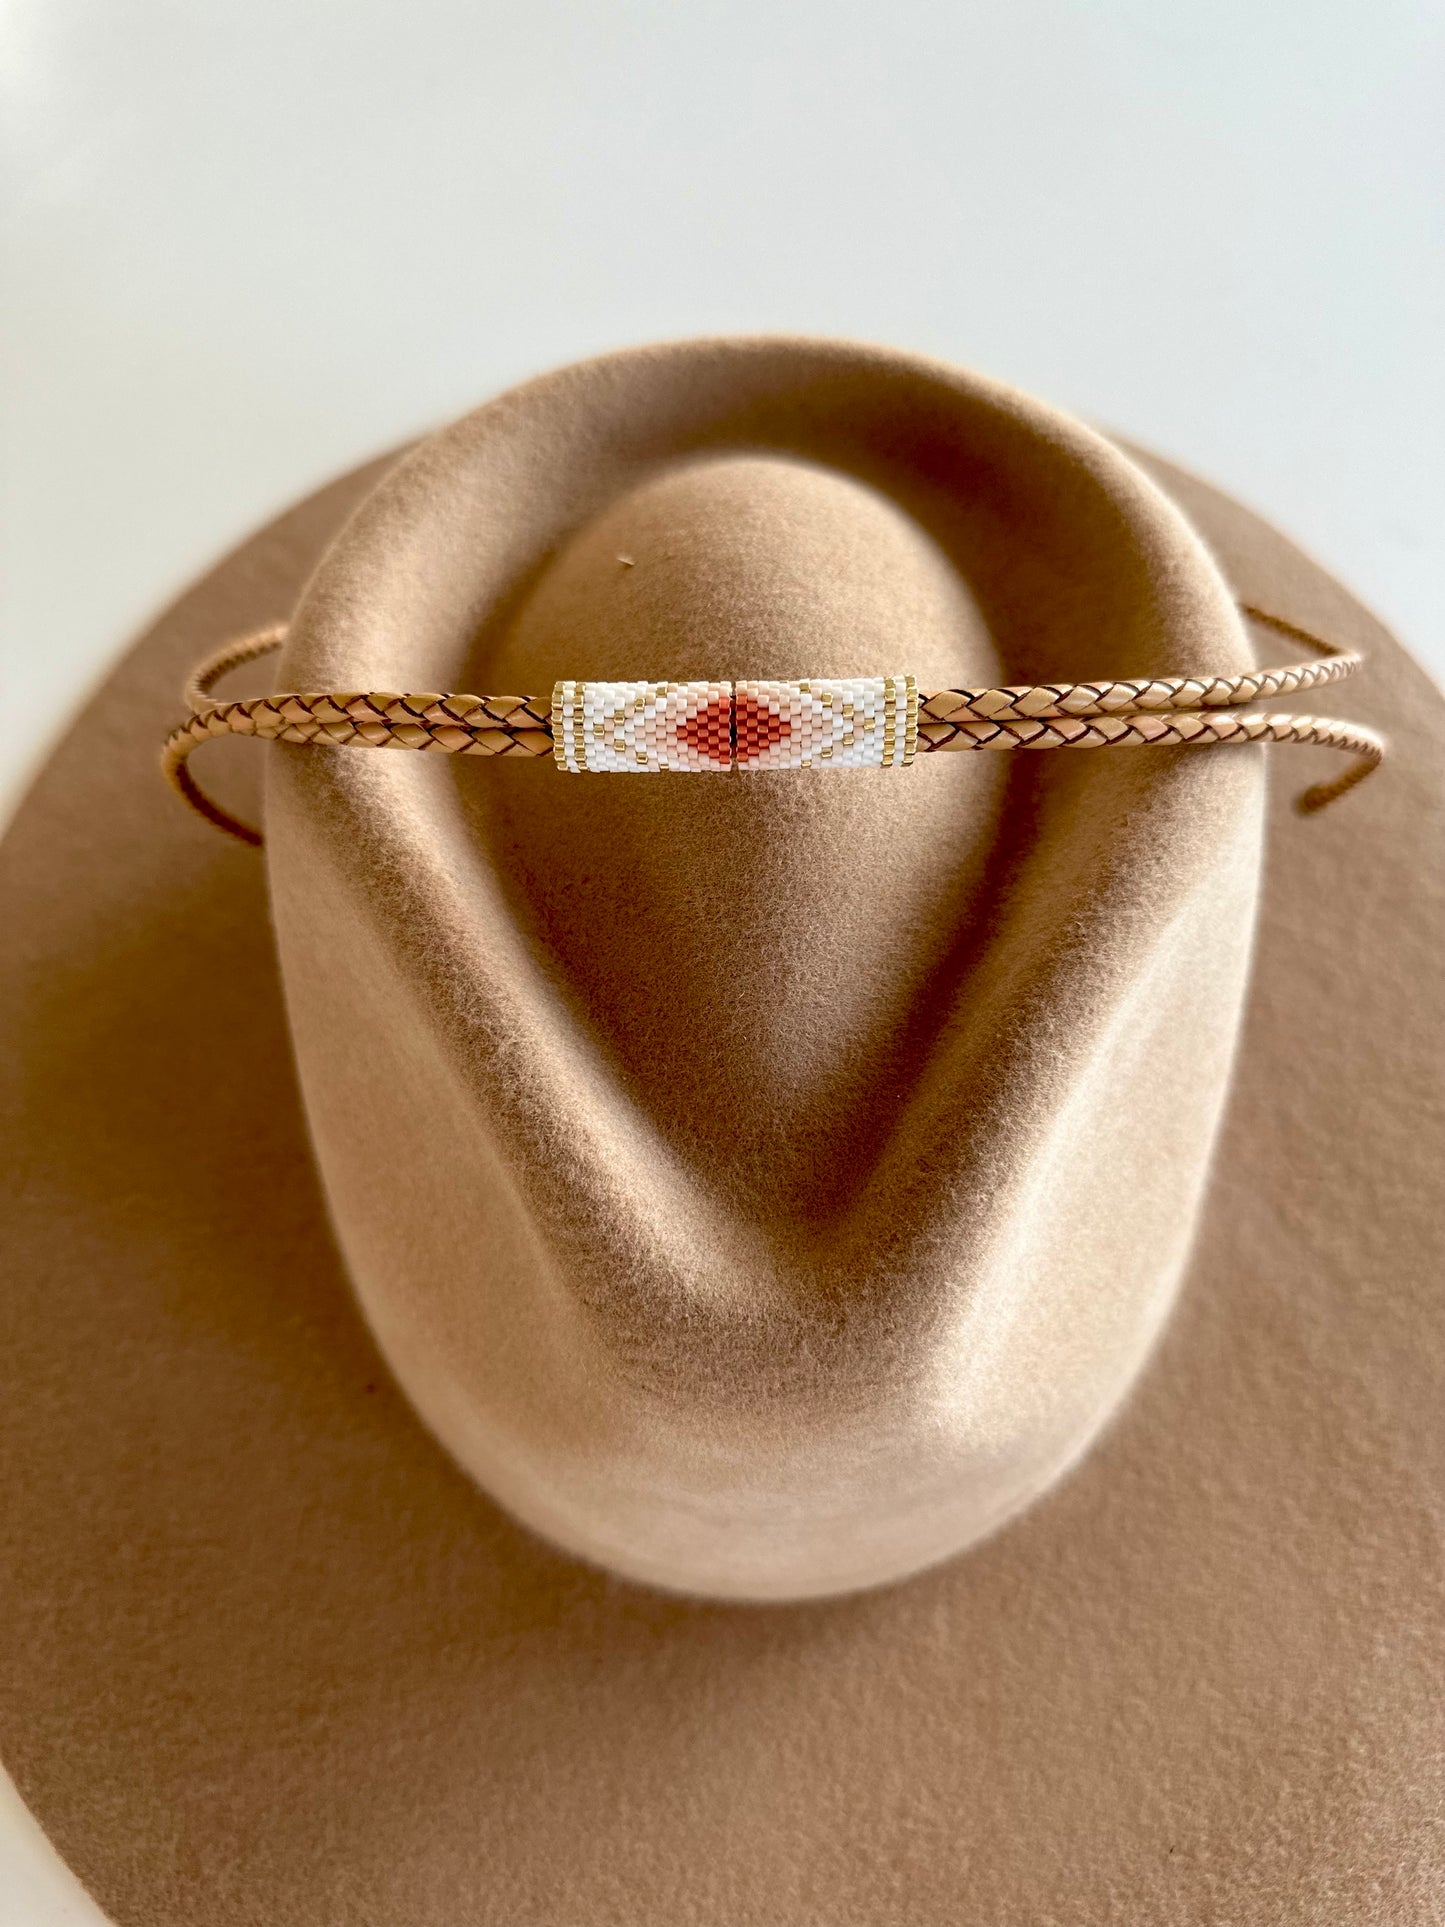 Leather Hatband - Pink and Camel